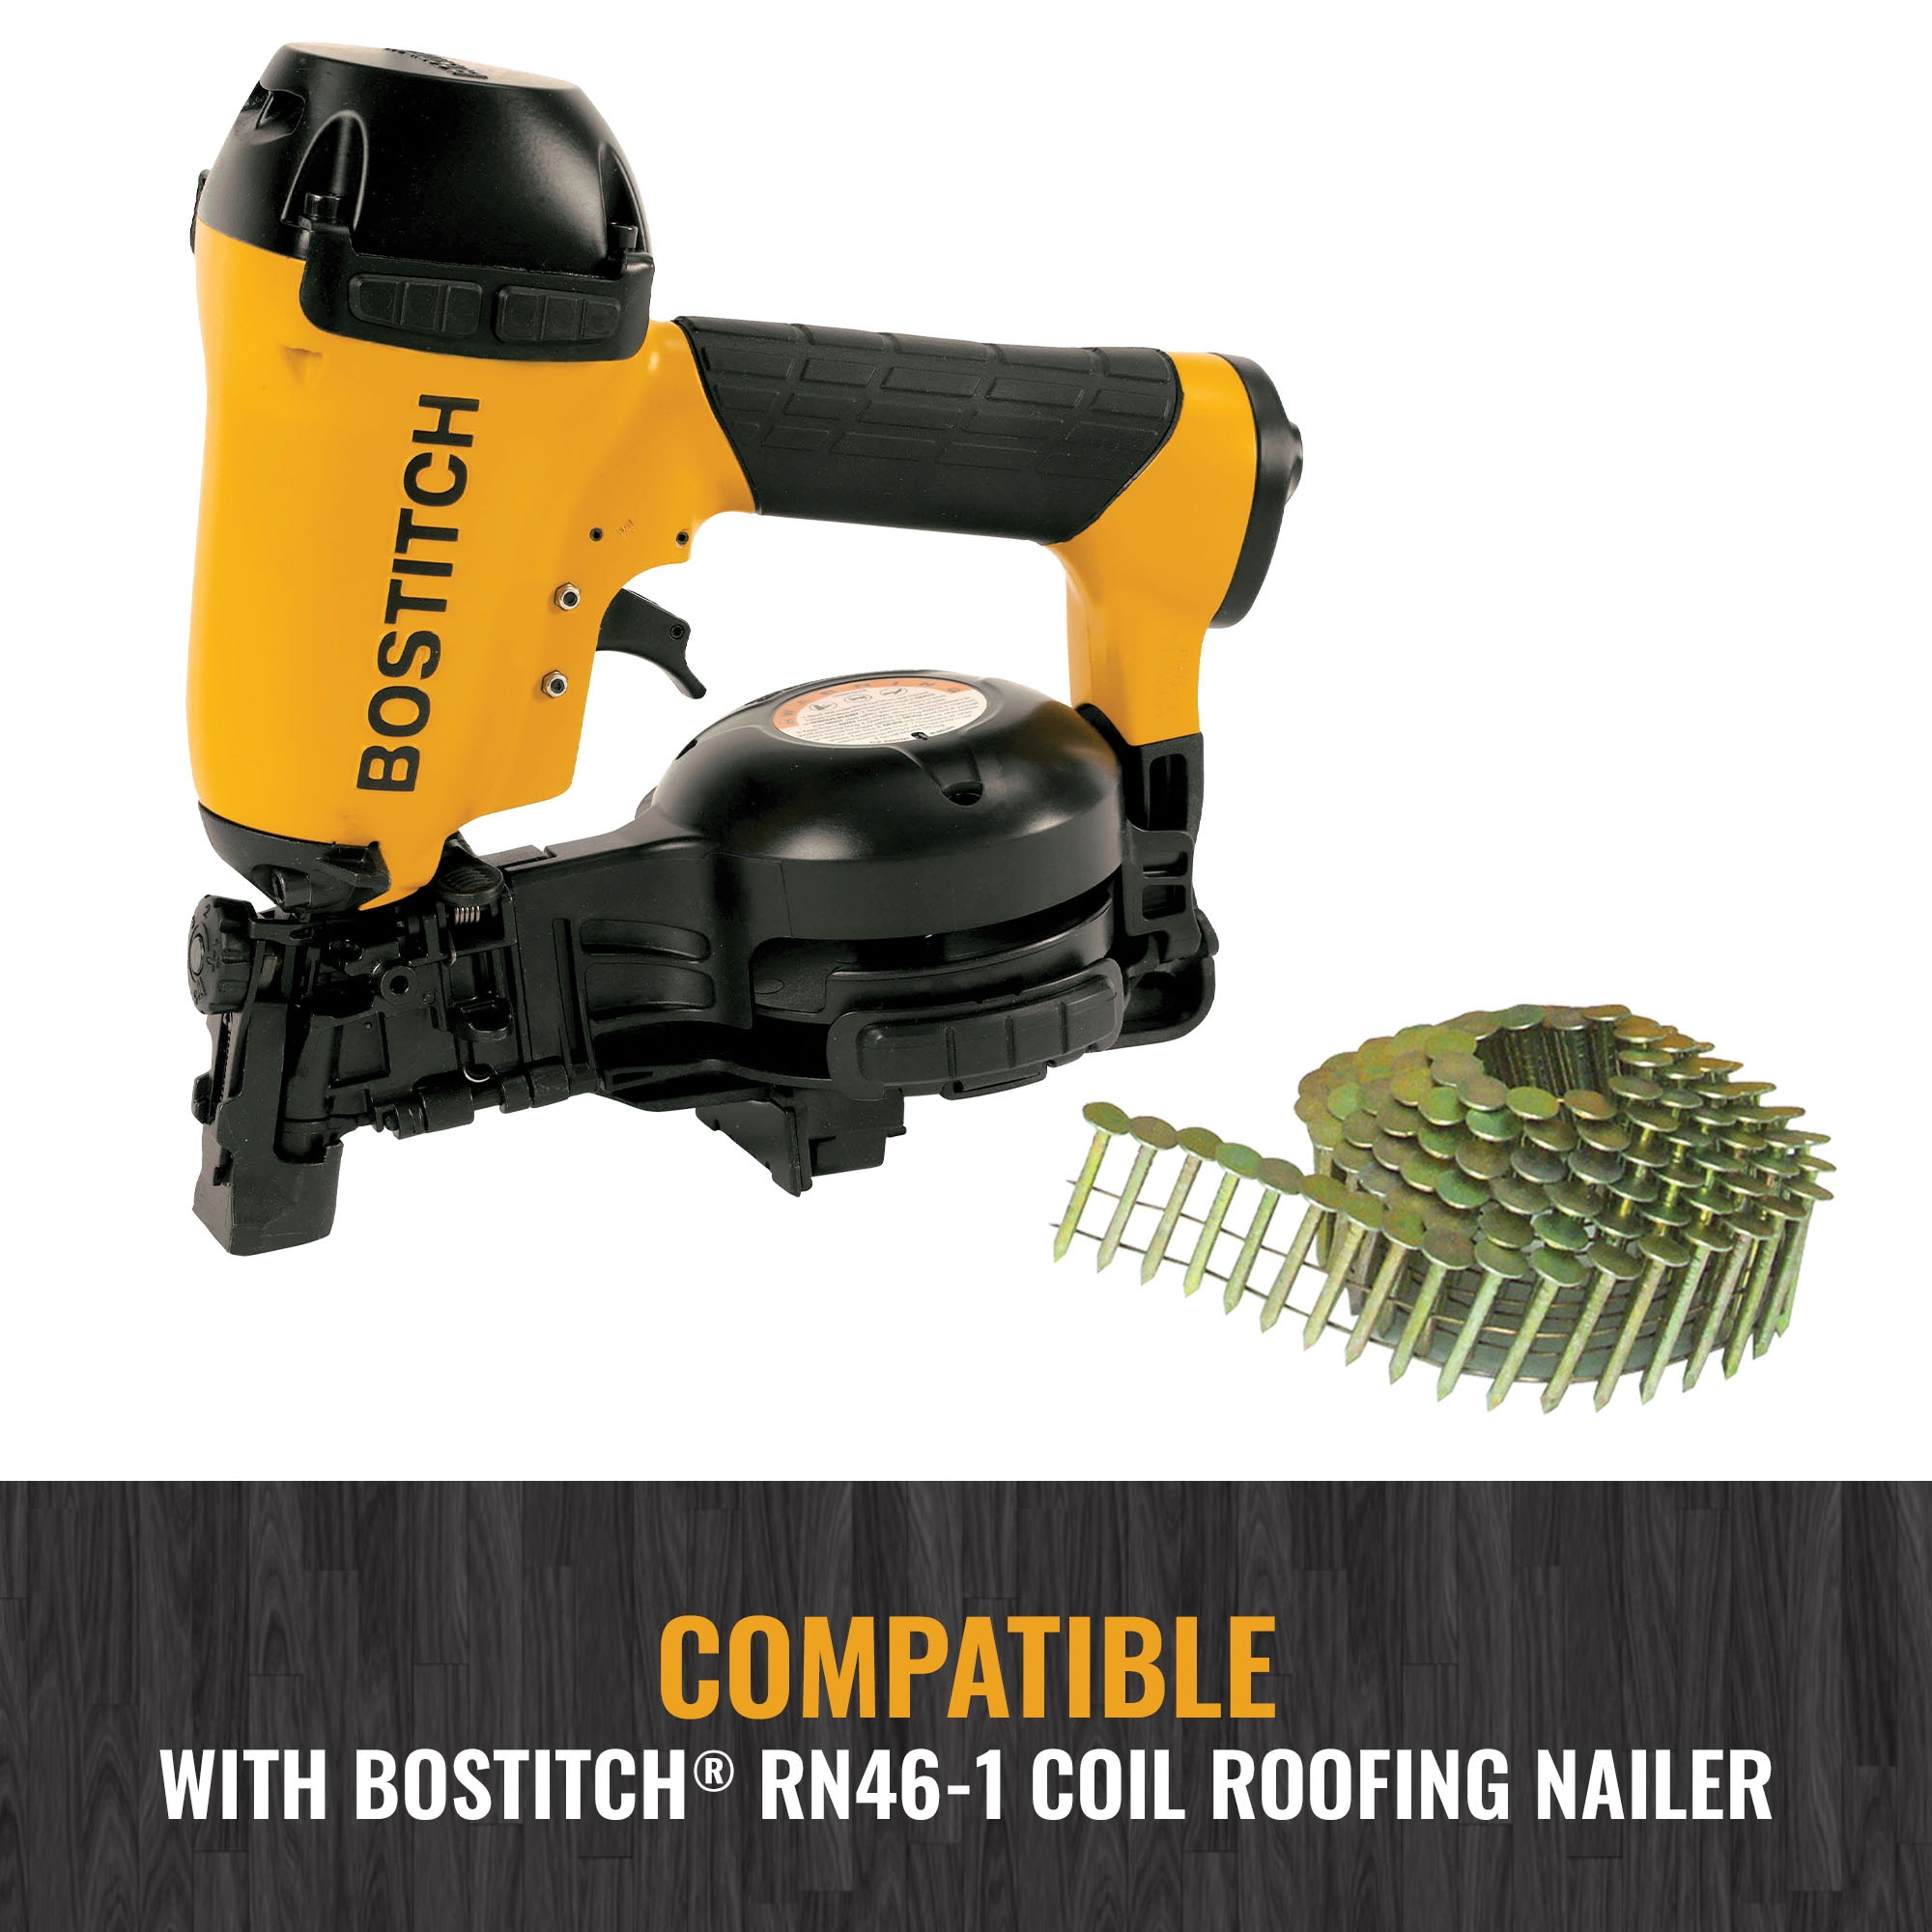 what nails are compatible with bostitch nail gun?